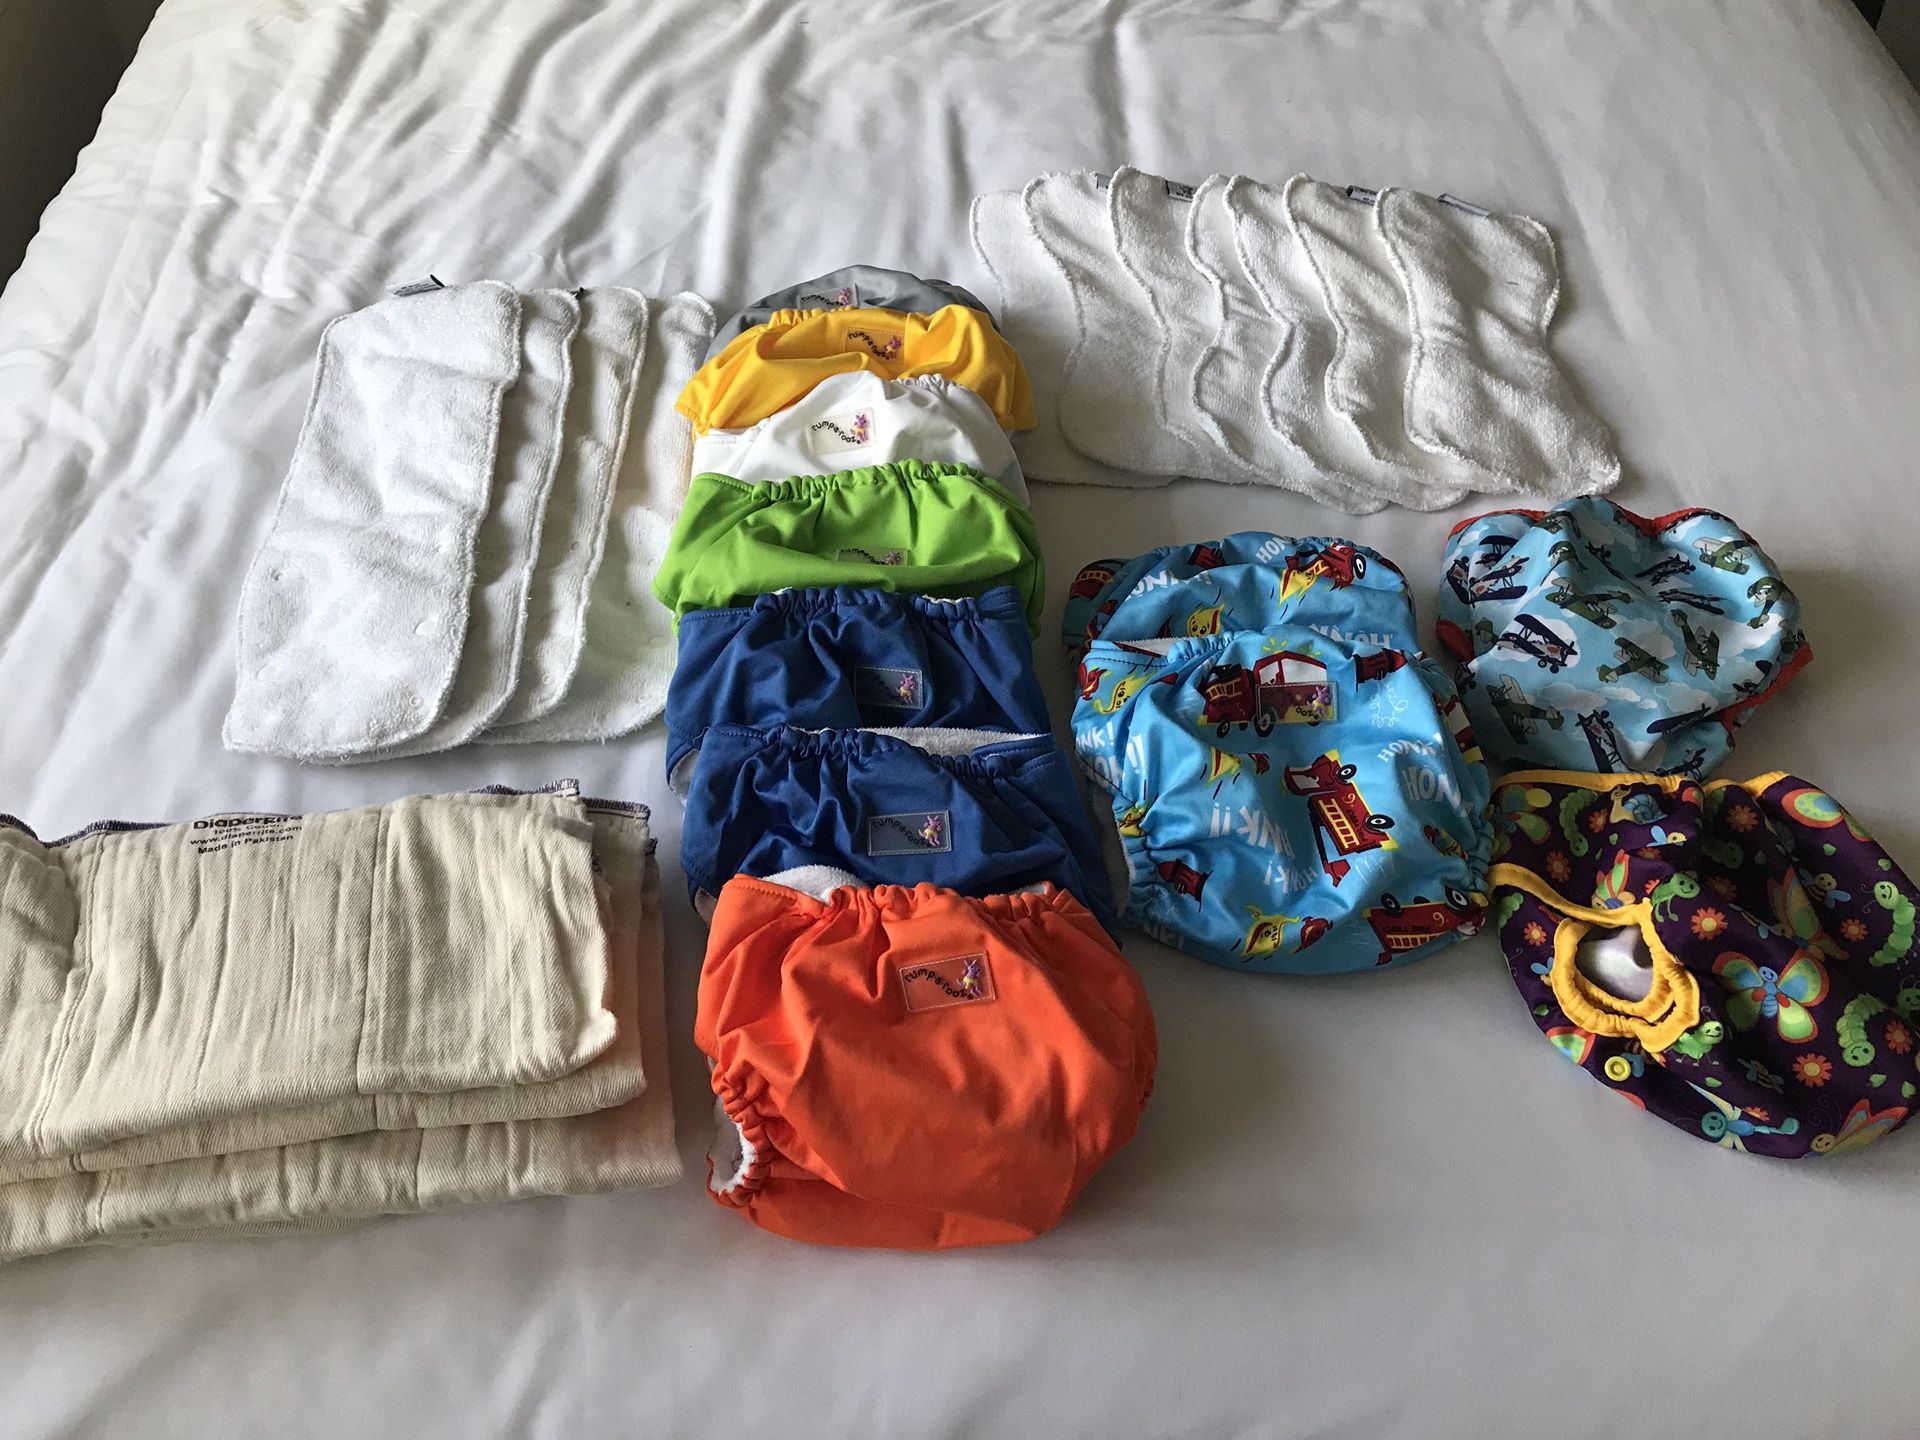 11 cloth diapers and inserts